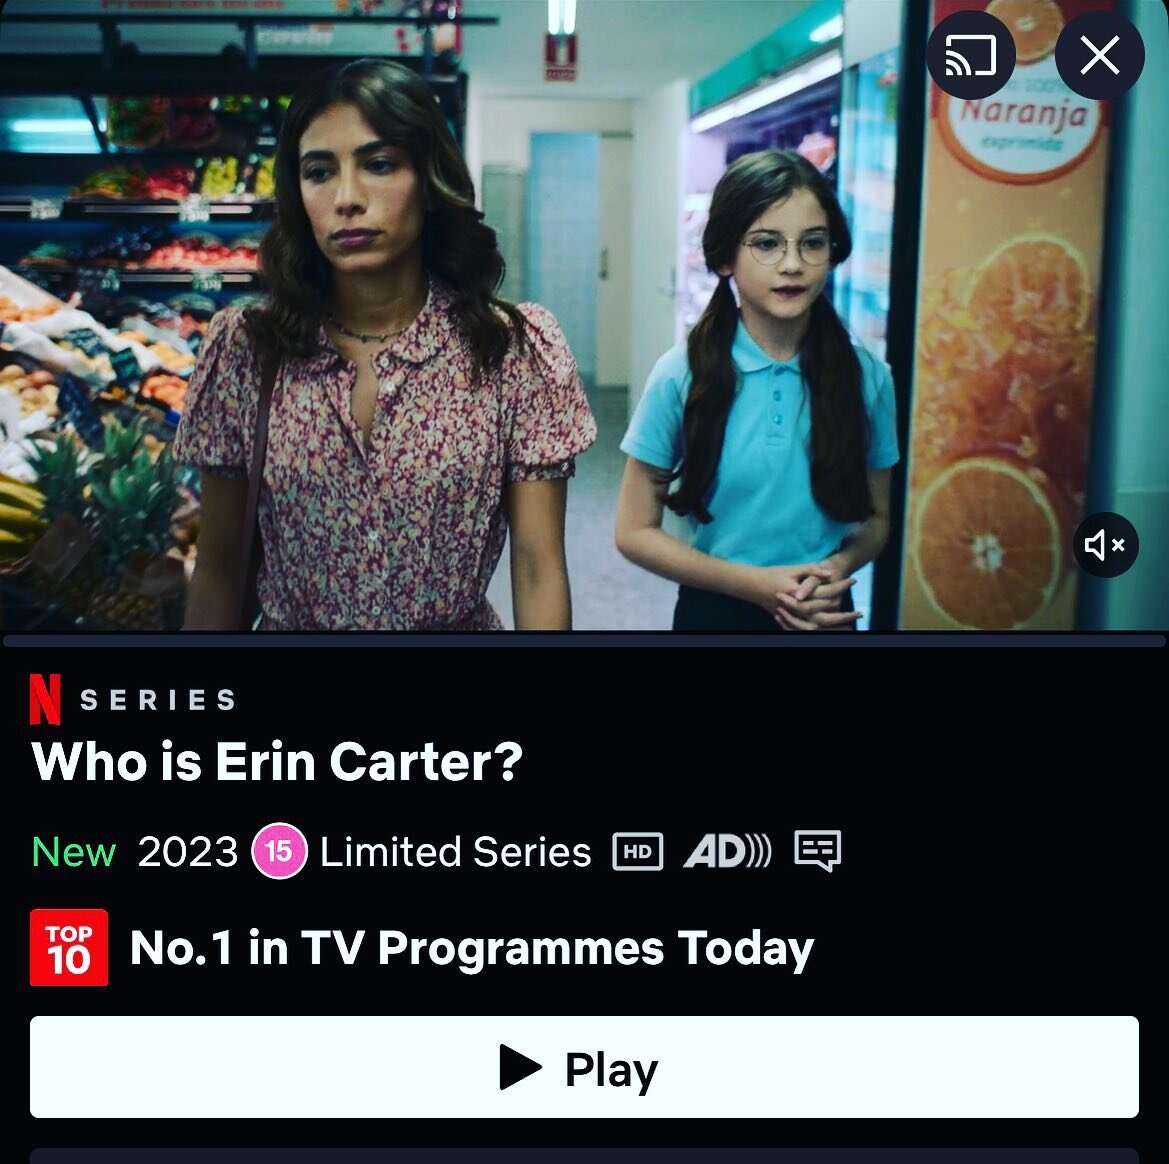 Had lots of fun creating some woodwind sounds for this new #netflix series, glad to see it&rsquo;s reached No 1 in the UK! Brilliant score by @jack_halama 🙌🏻 thanks for having me! 
&bull;
&bull;
#whoiserincarter #newseries #no1 #woodwind #tvmusic #